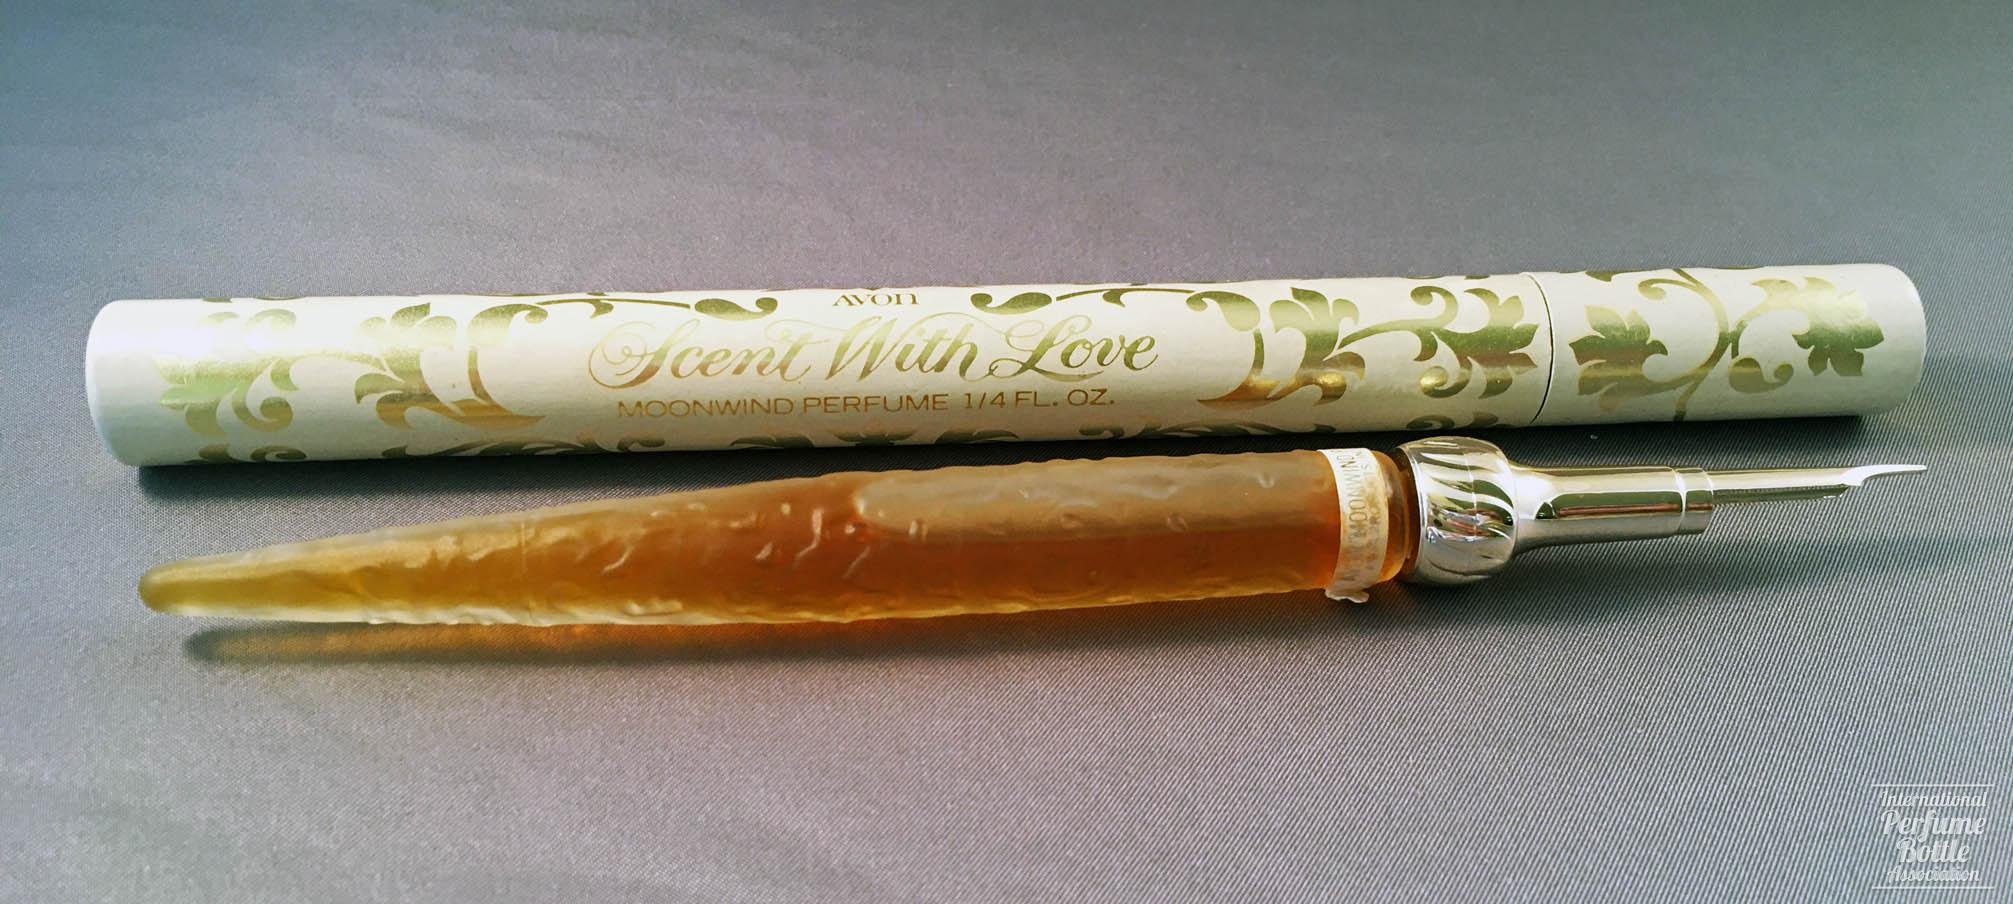 "Scent With Love" Pen Perfume by Avon